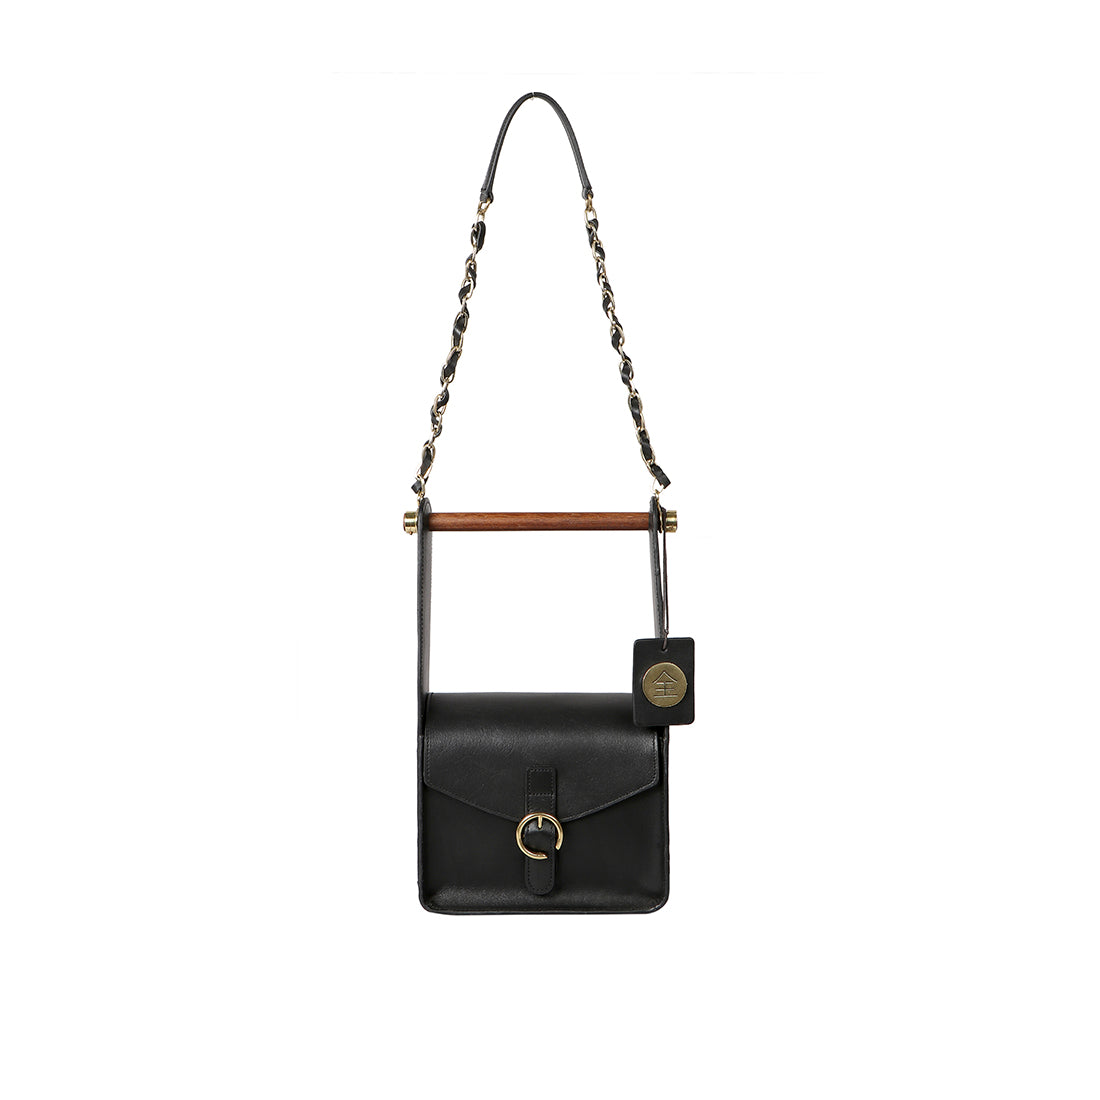 HIDESIGN - Introducing the Zazen bag from our Zen collection